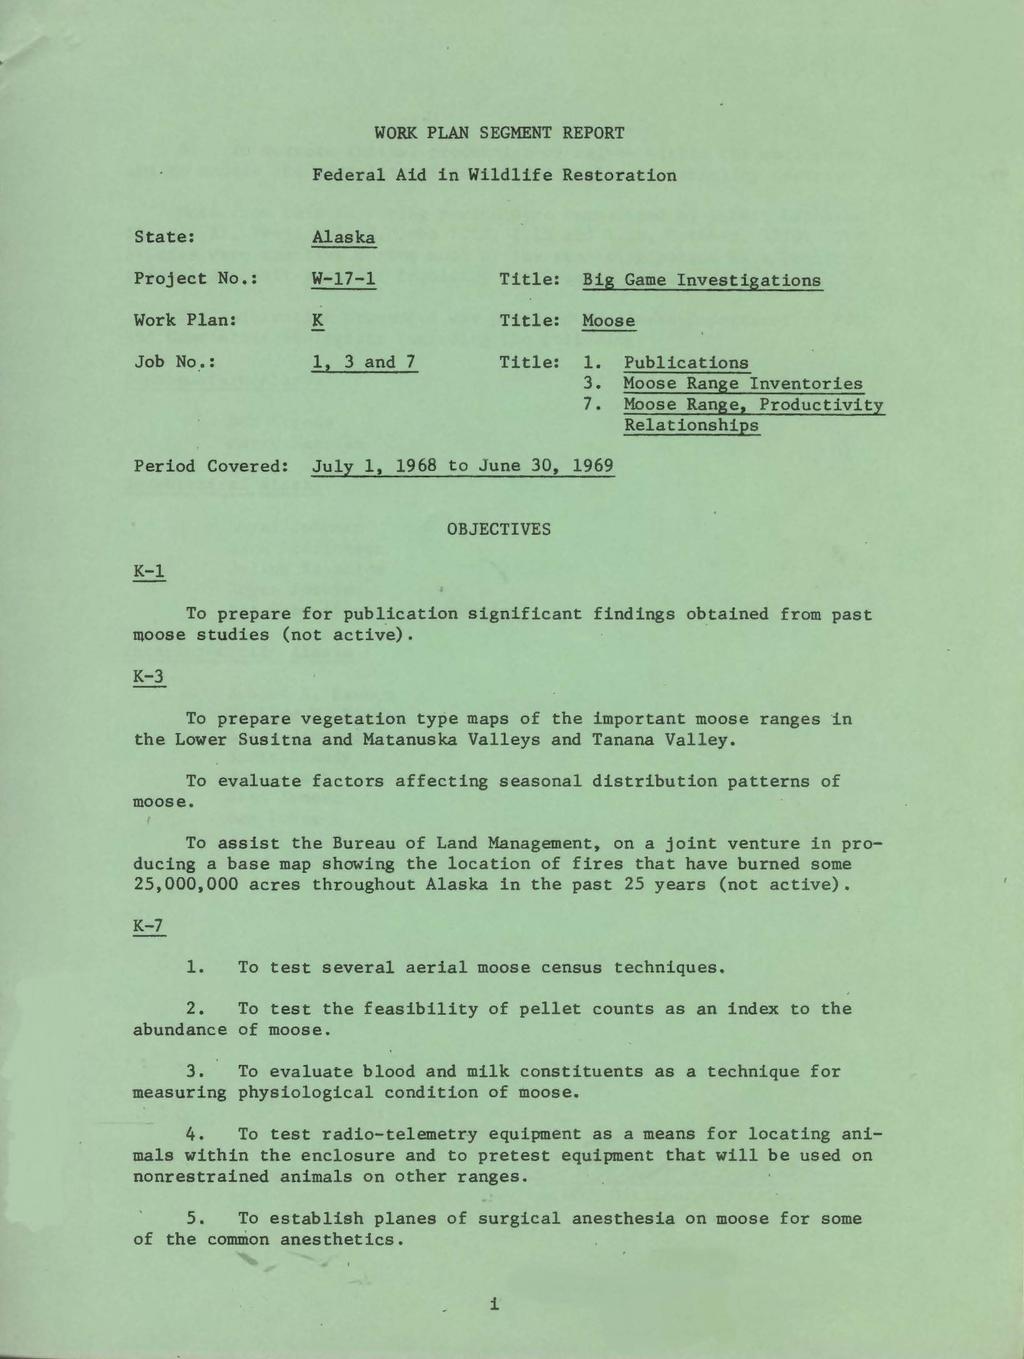 WORK PLAN SEGMENT REPORT Federal Aid in Wildlife Restoration State: Project No.: Work Plan: Job No. : Alaska W-17-1 K 1, 3 and 7 Title: Big Game nvestigations Title: Moose Title: 1. Publications 3.